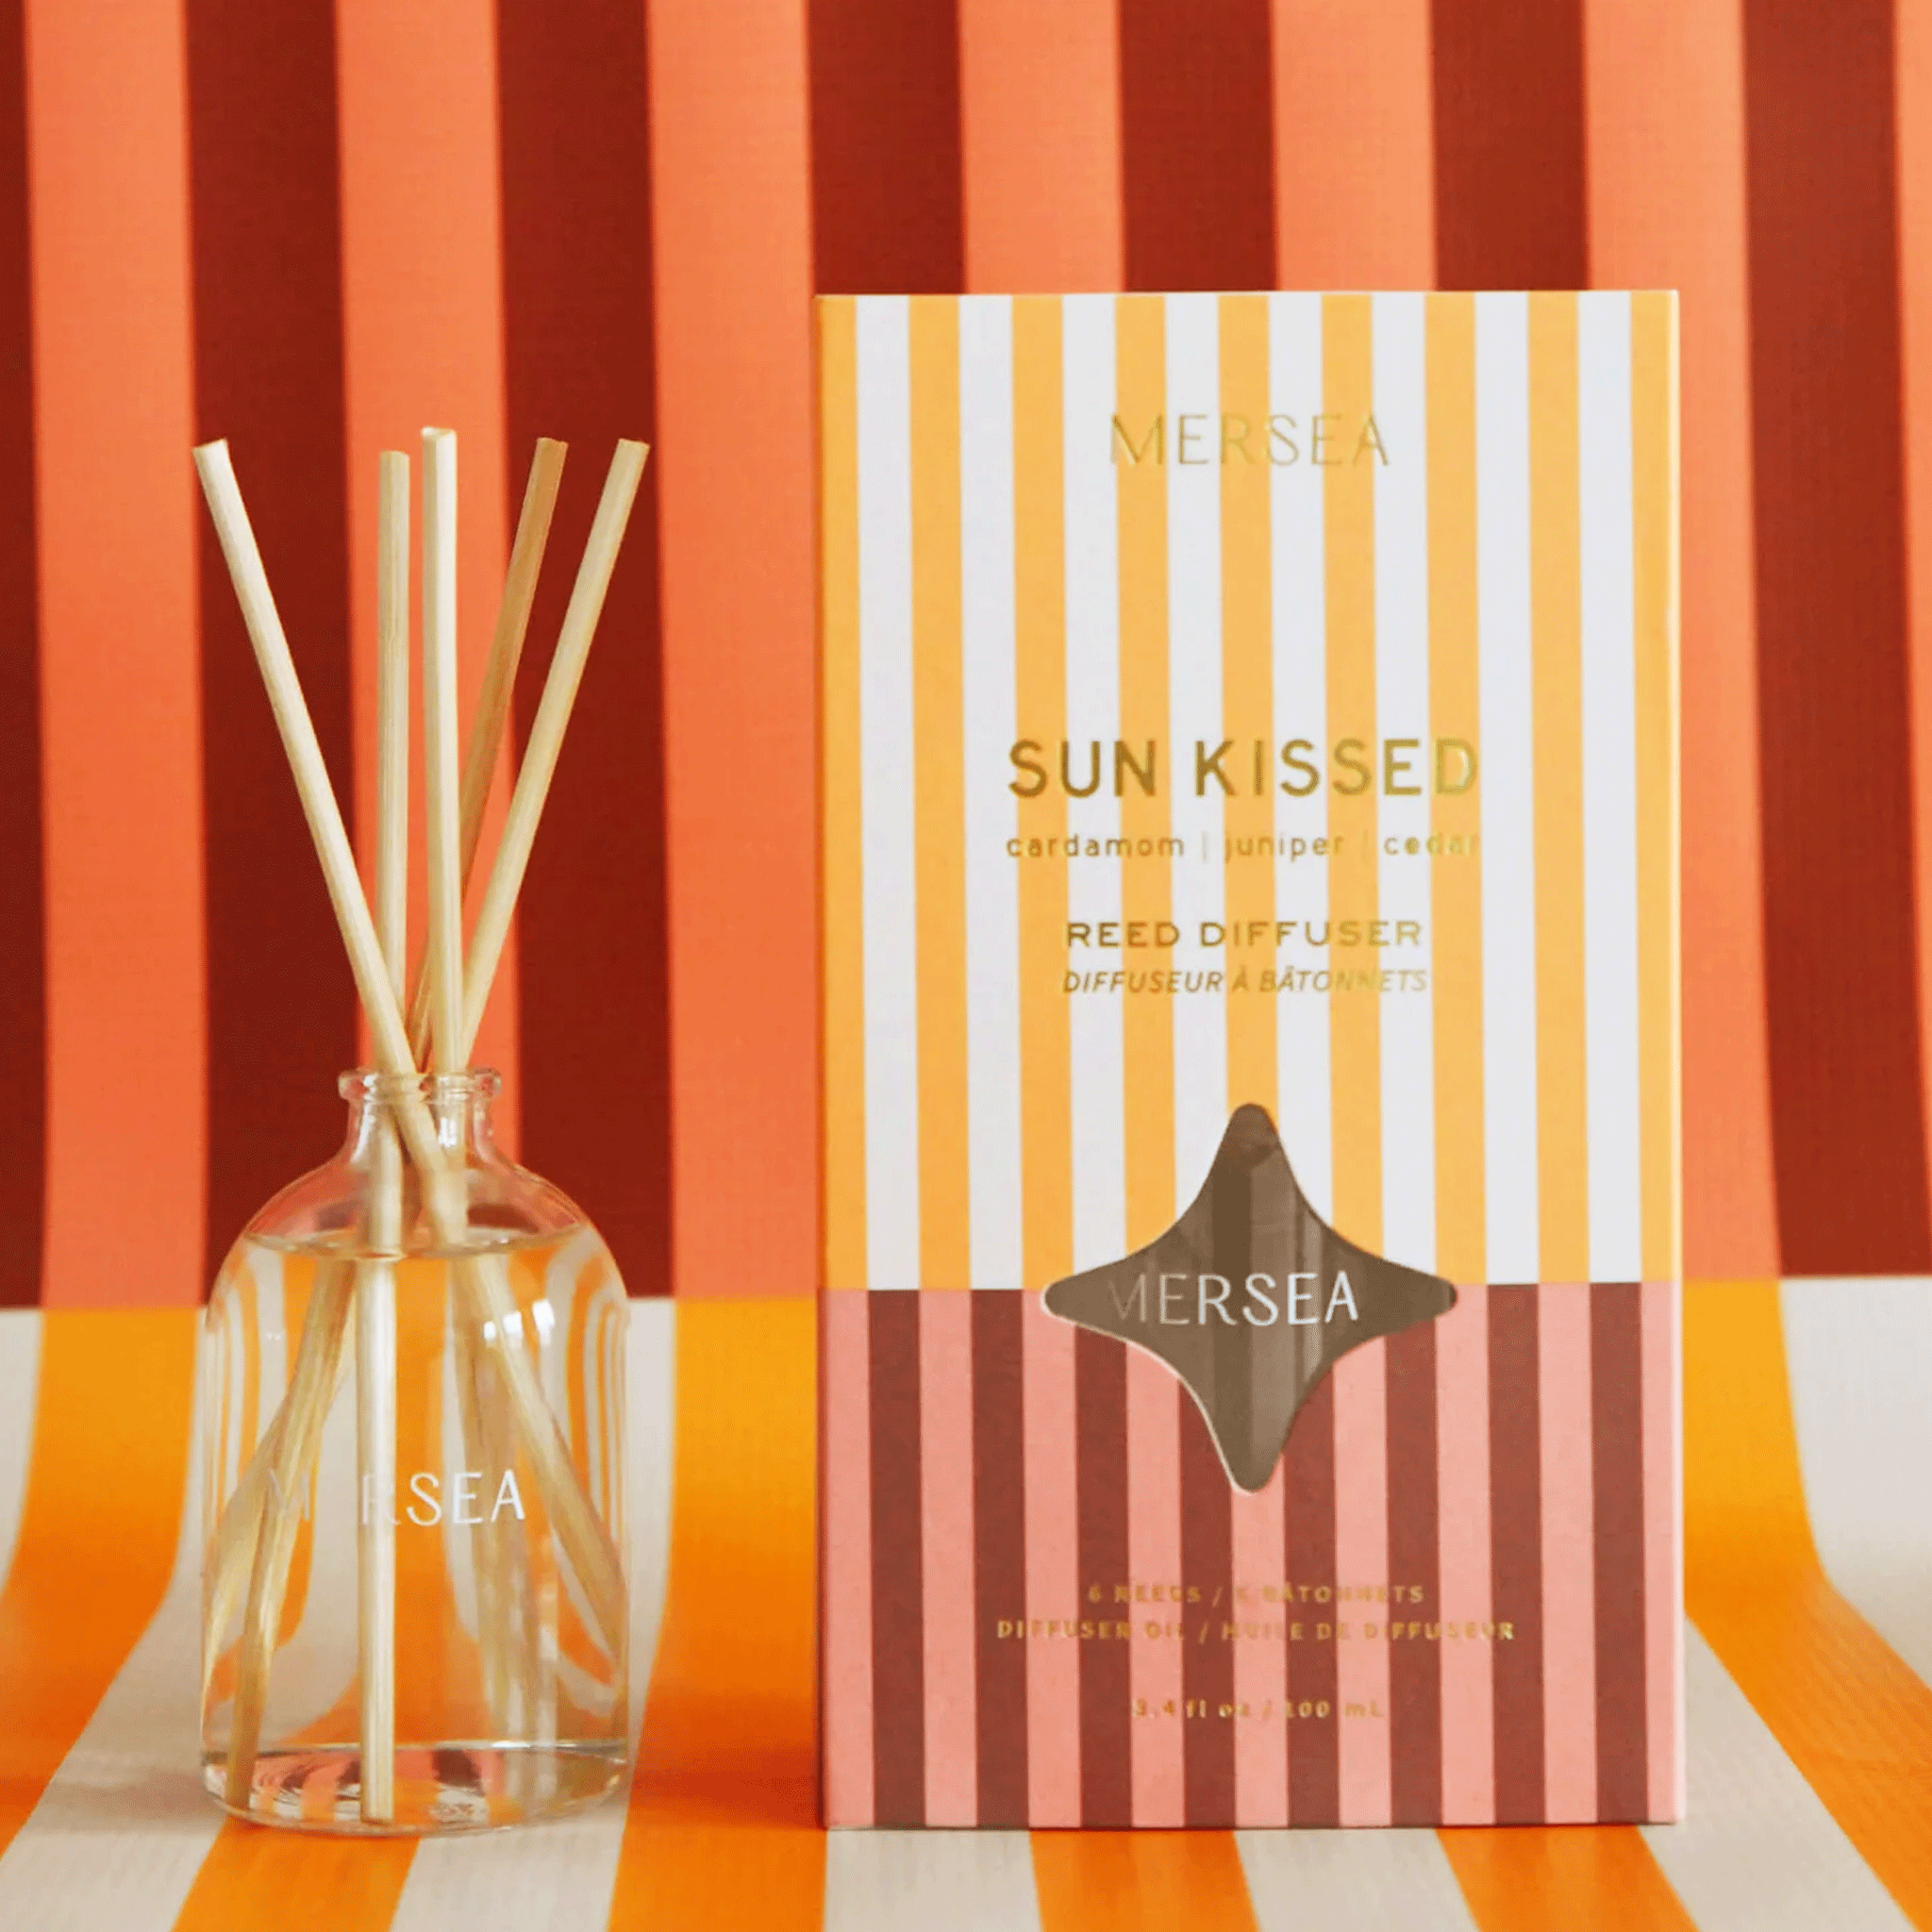 On a striped background is a box and a glass bottle with wooden reed diffusers. 